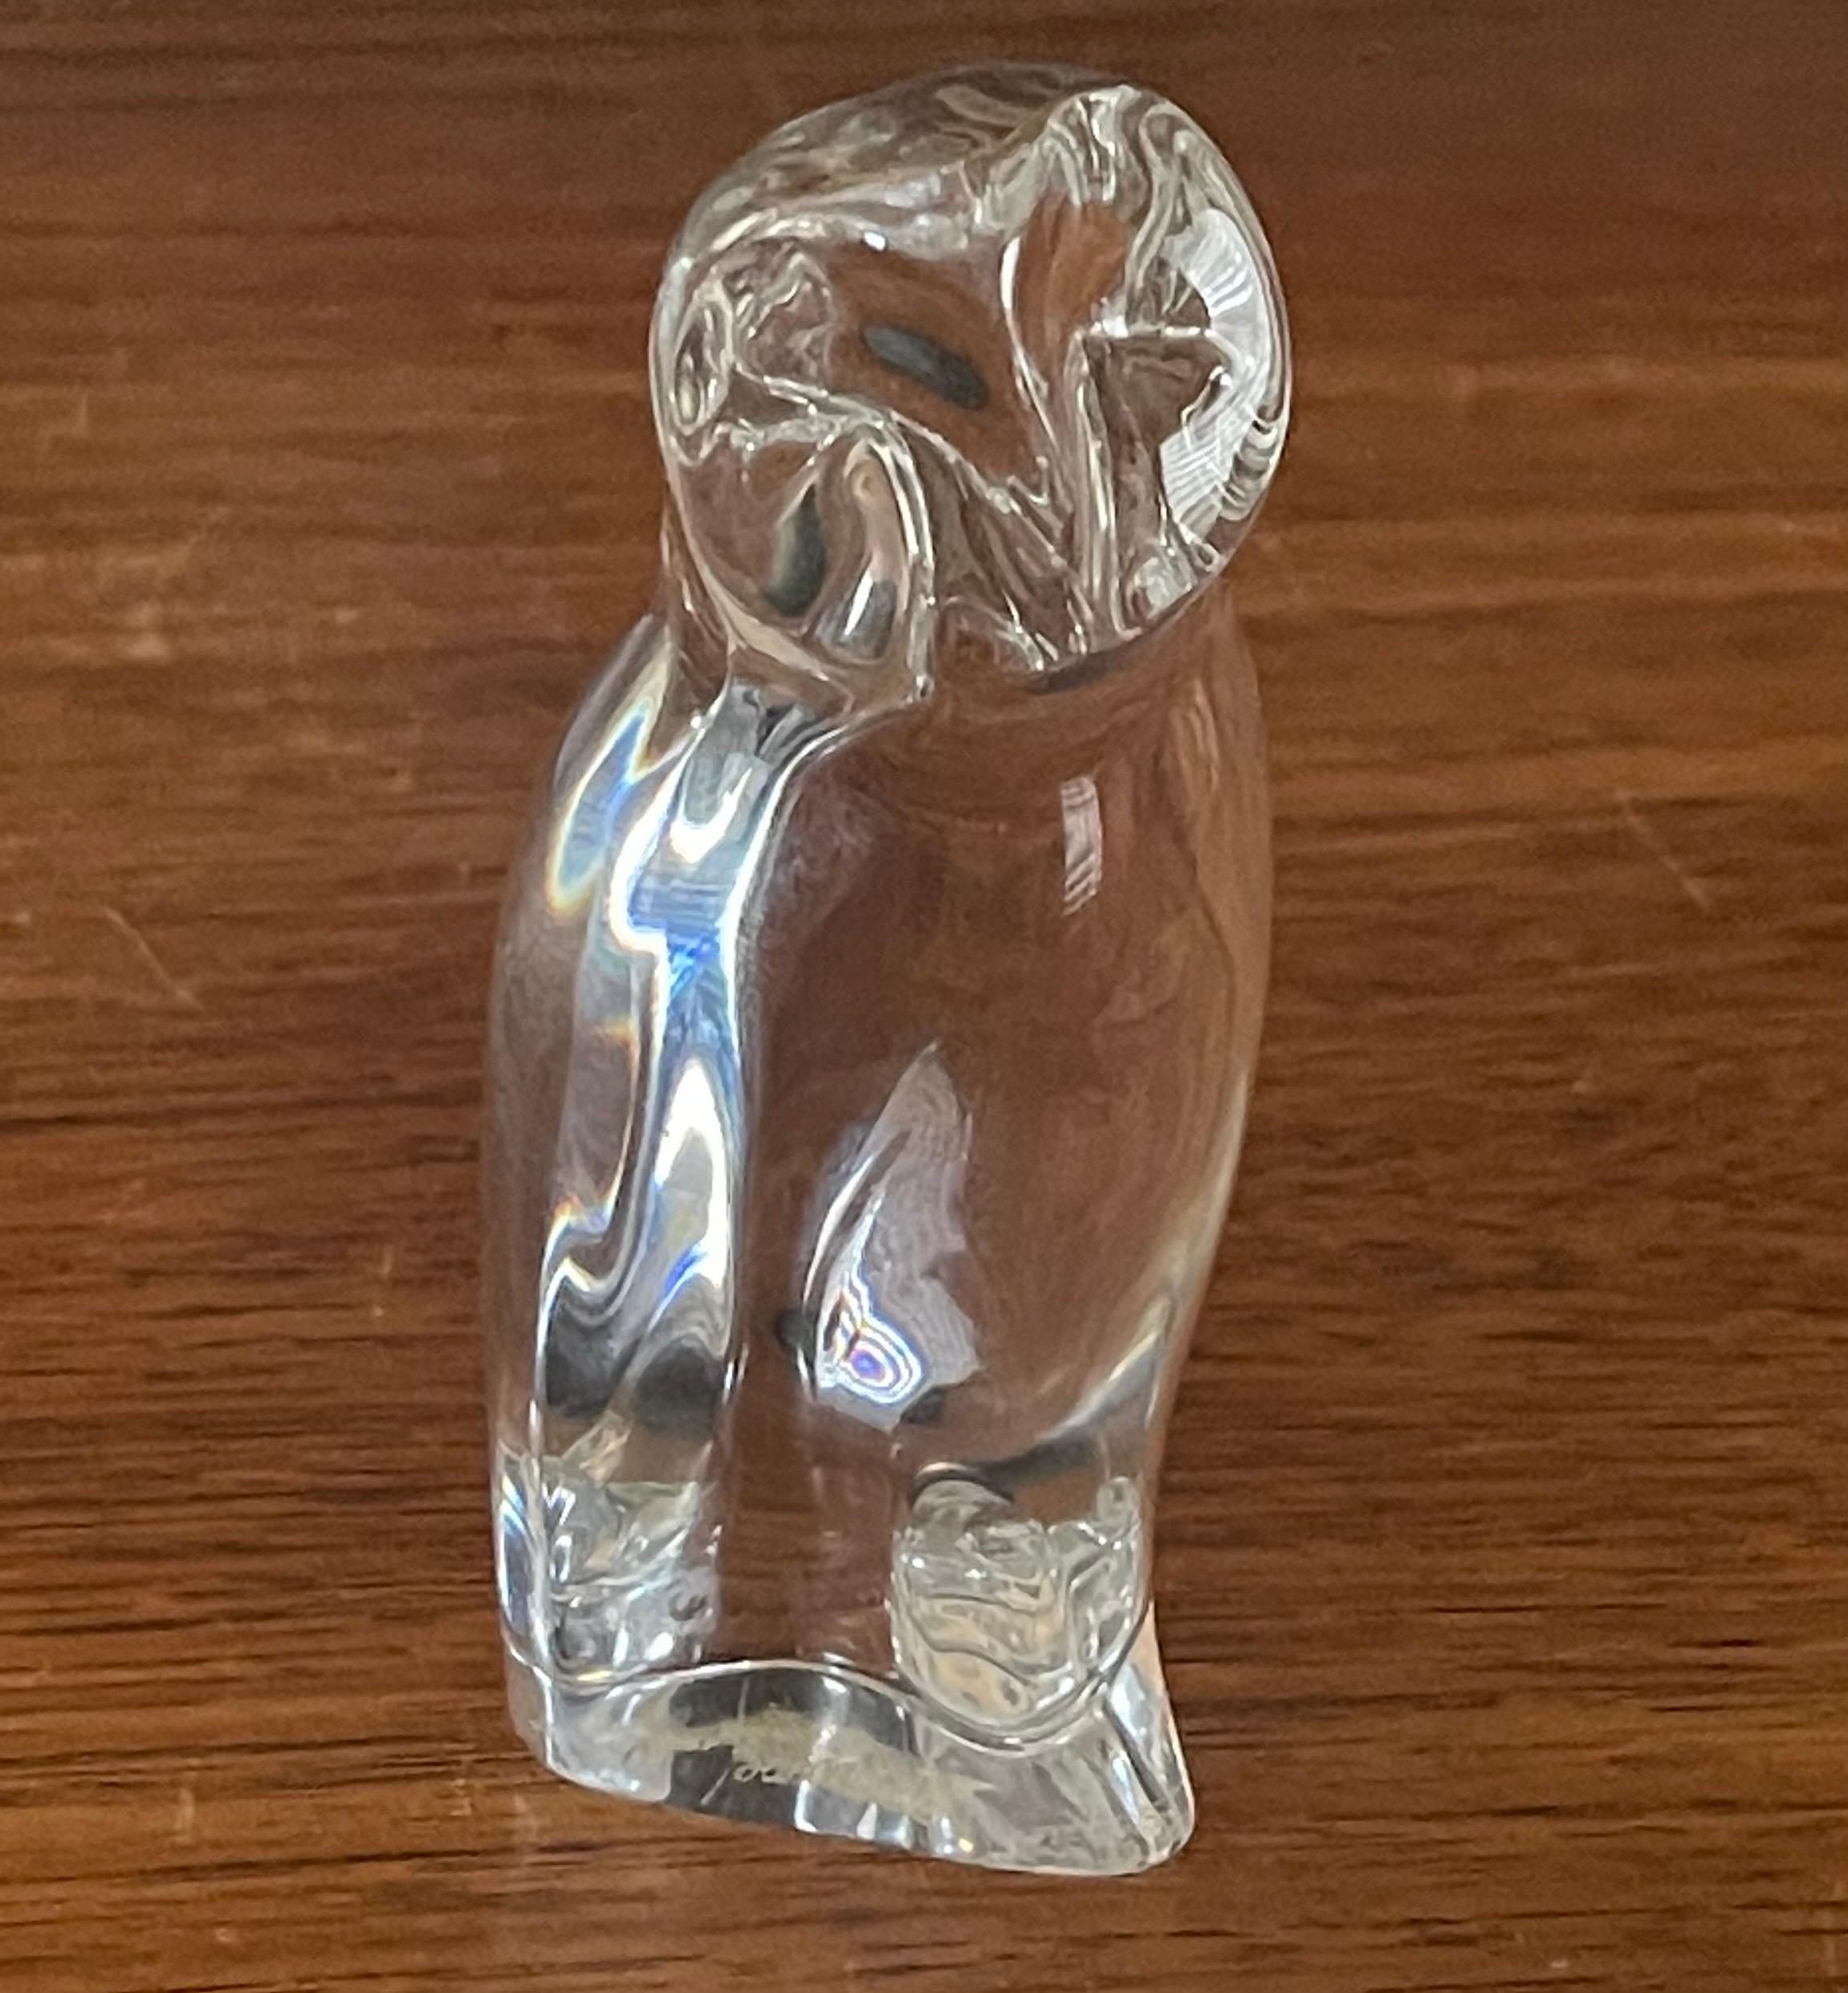 Gorgeous stylized crystal owl sculpture / paperweight by Baccarat, circa 1990s. The piece is in excellent condition with no visible imperfections and has great clarity. Signed on the underside, the piece measures 2